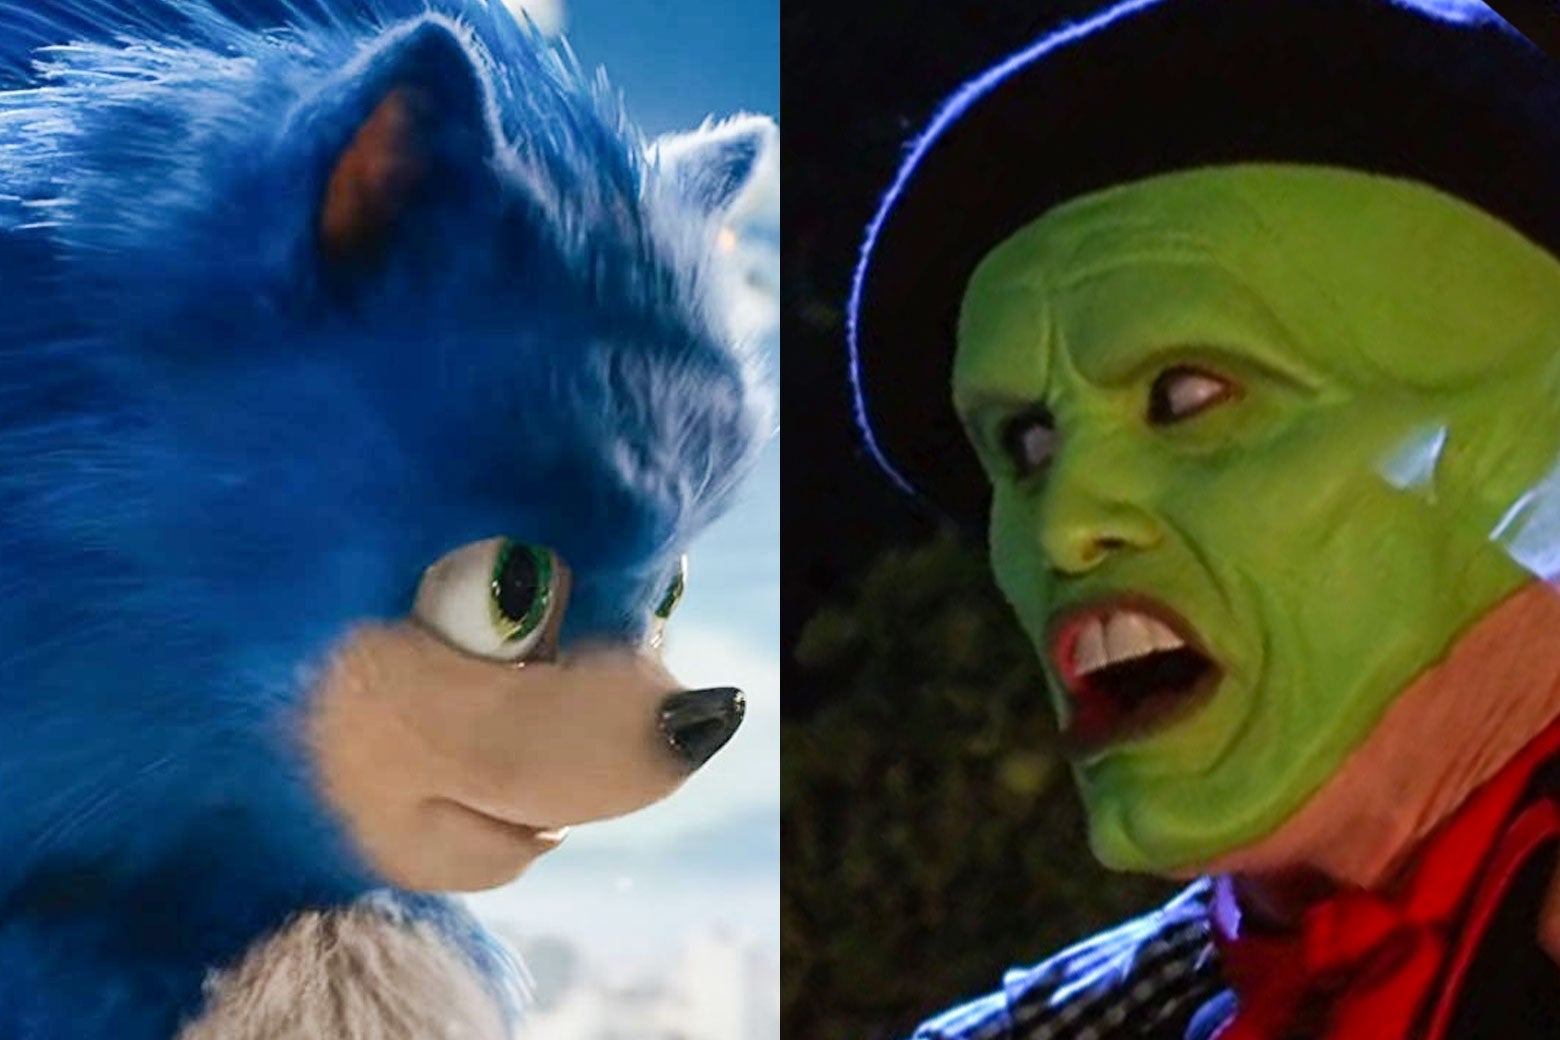 Sonic the Hedgehog and Jim Carrey's The Mask stare each other down.